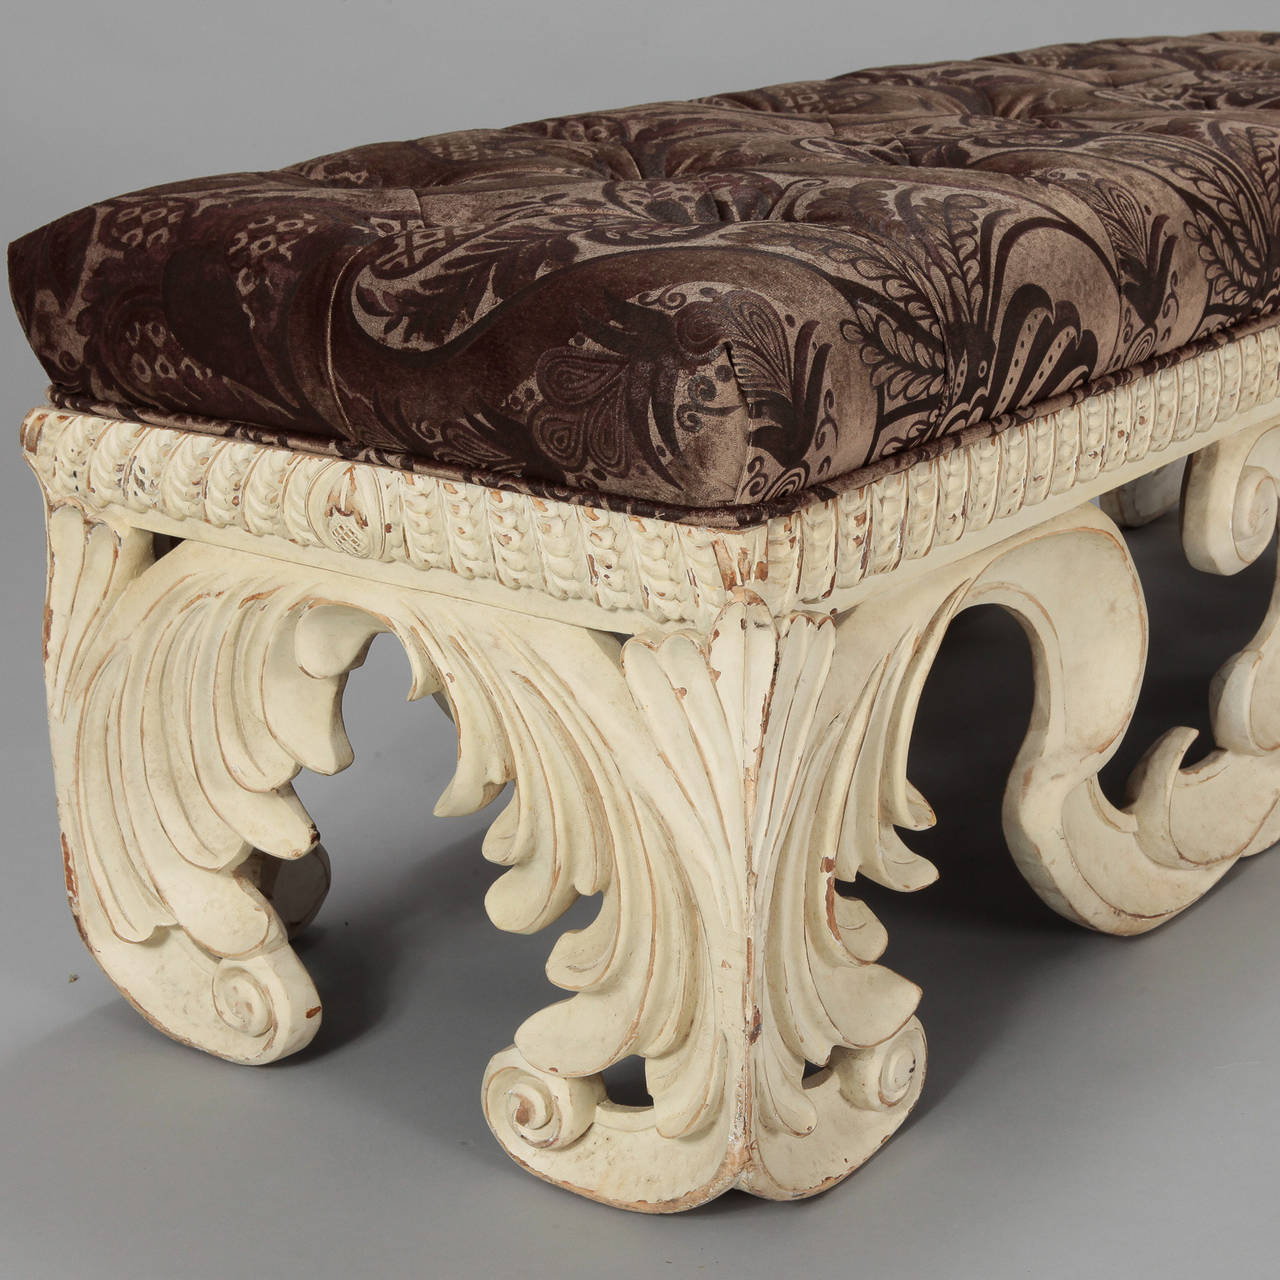 CIrca 1960s Italian upholstered bench with heavily carved open work base and white painted finish. Upholstered in printed velvet fabric